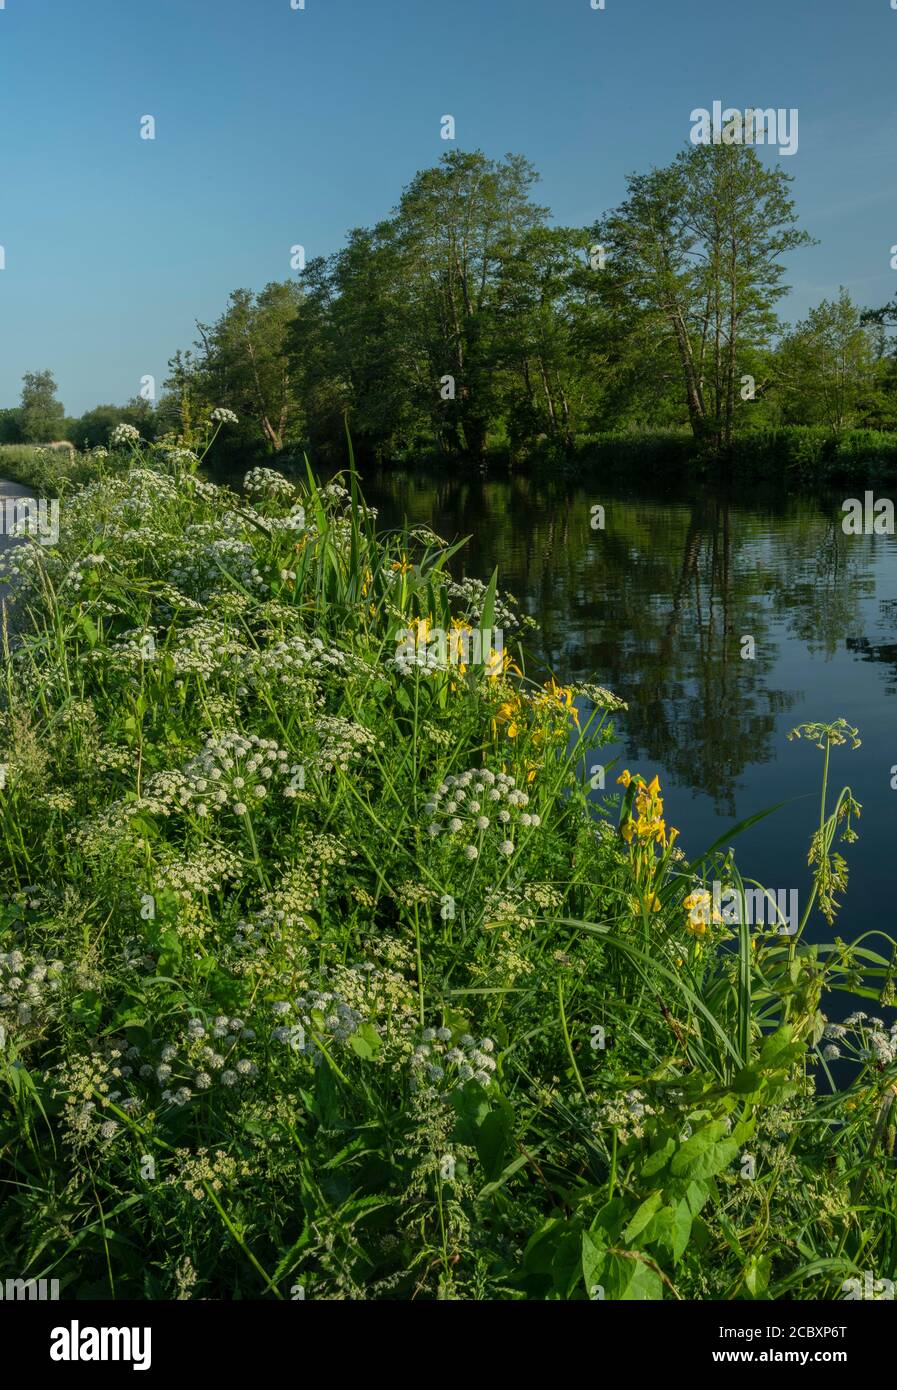 Hemlock Water Dropwort and Yellow Iris growing by the River Stour, with Alder trees beyond. Dorset. Stock Photo